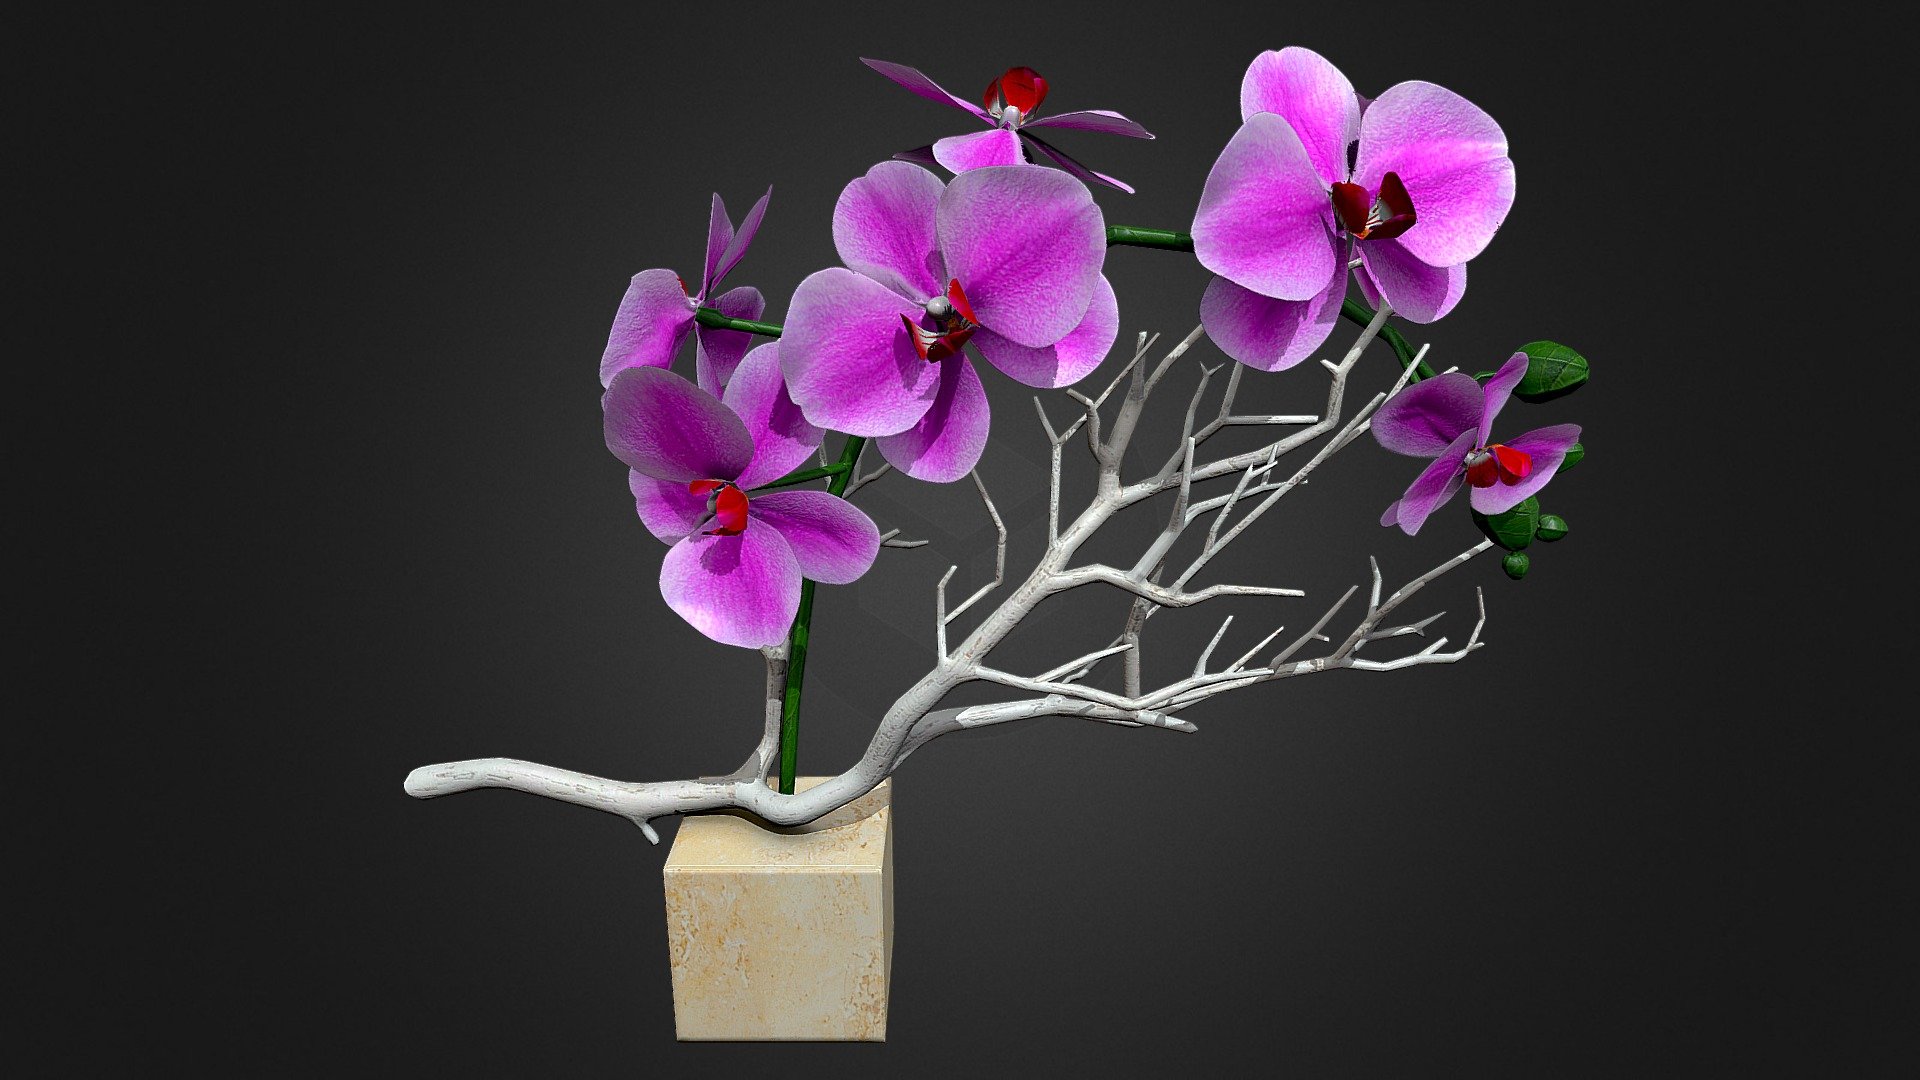 lily flowers below is bamboo. In a glass vase. For low poly games - orchid flowers - 3D model by centaurus21 3d model